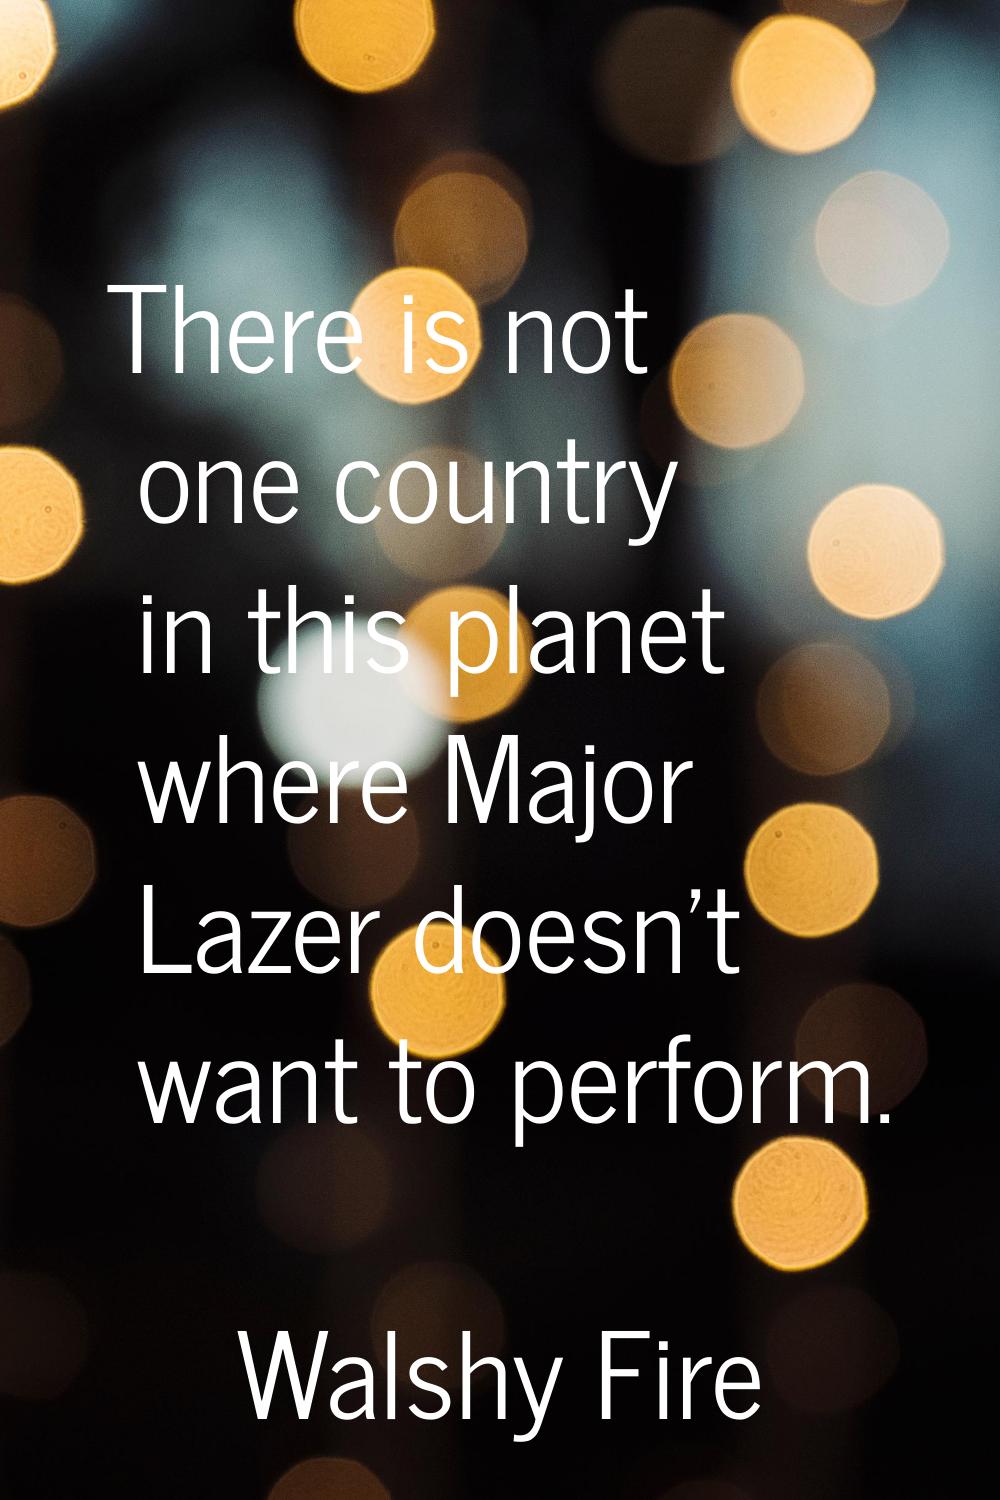 There is not one country in this planet where Major Lazer doesn't want to perform.